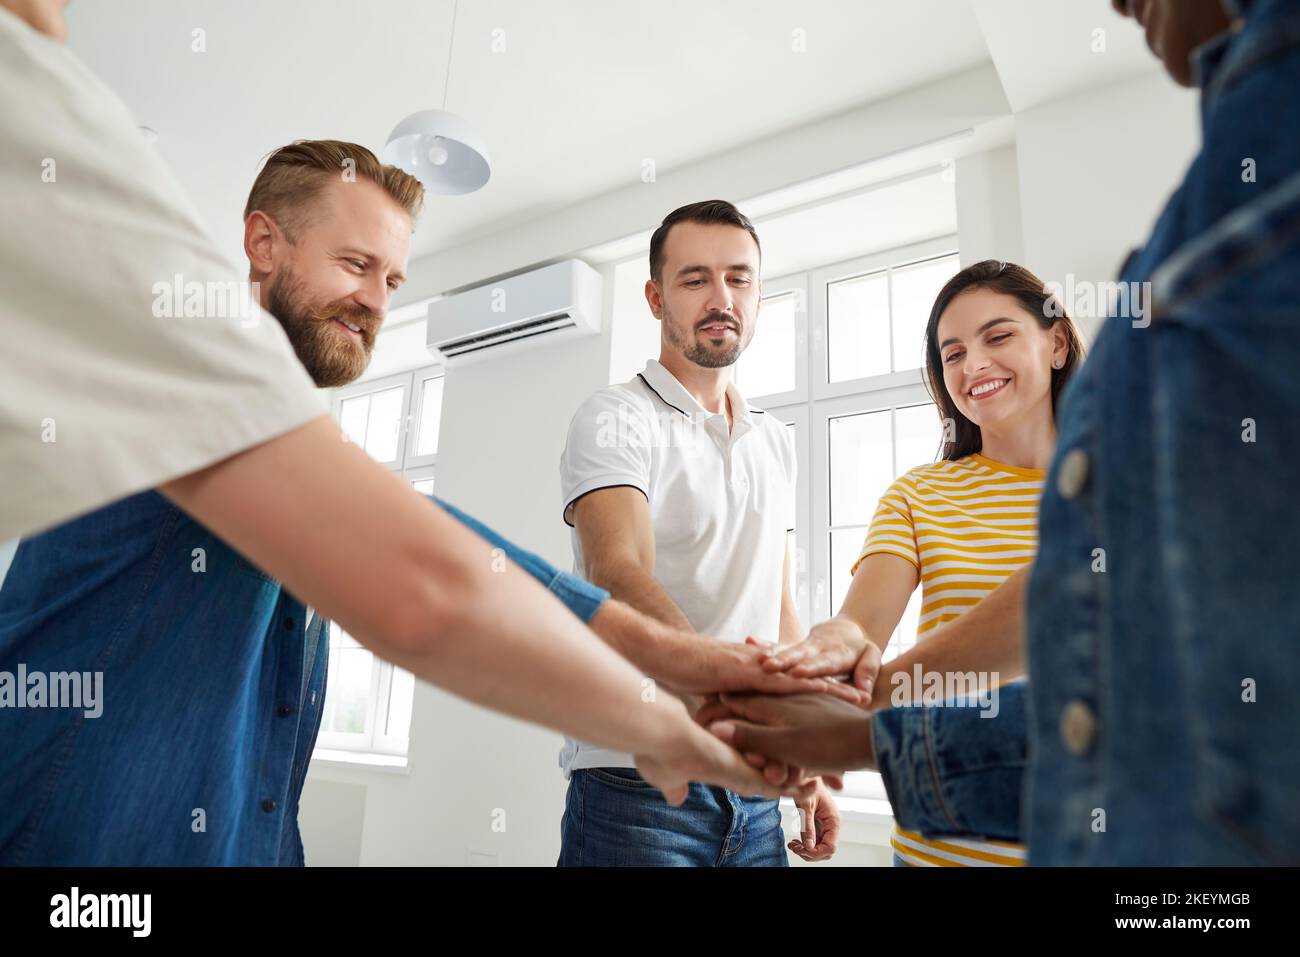 Team of happy people joining their hands to show concept of teamwork and success Stock Photo